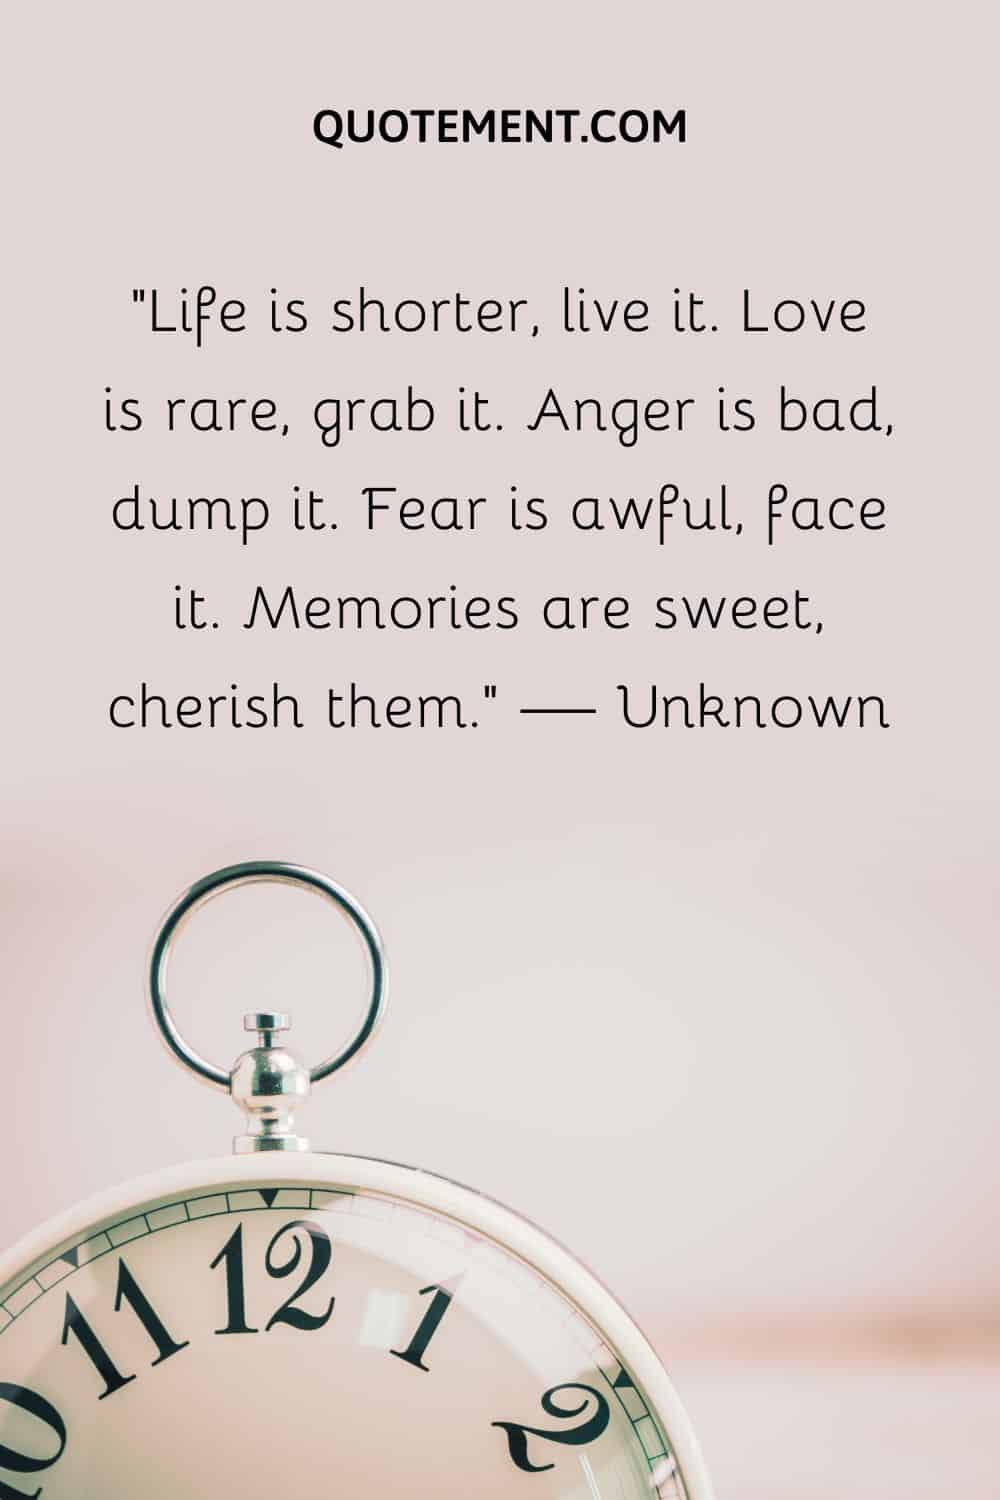 Life is shorter, live it.